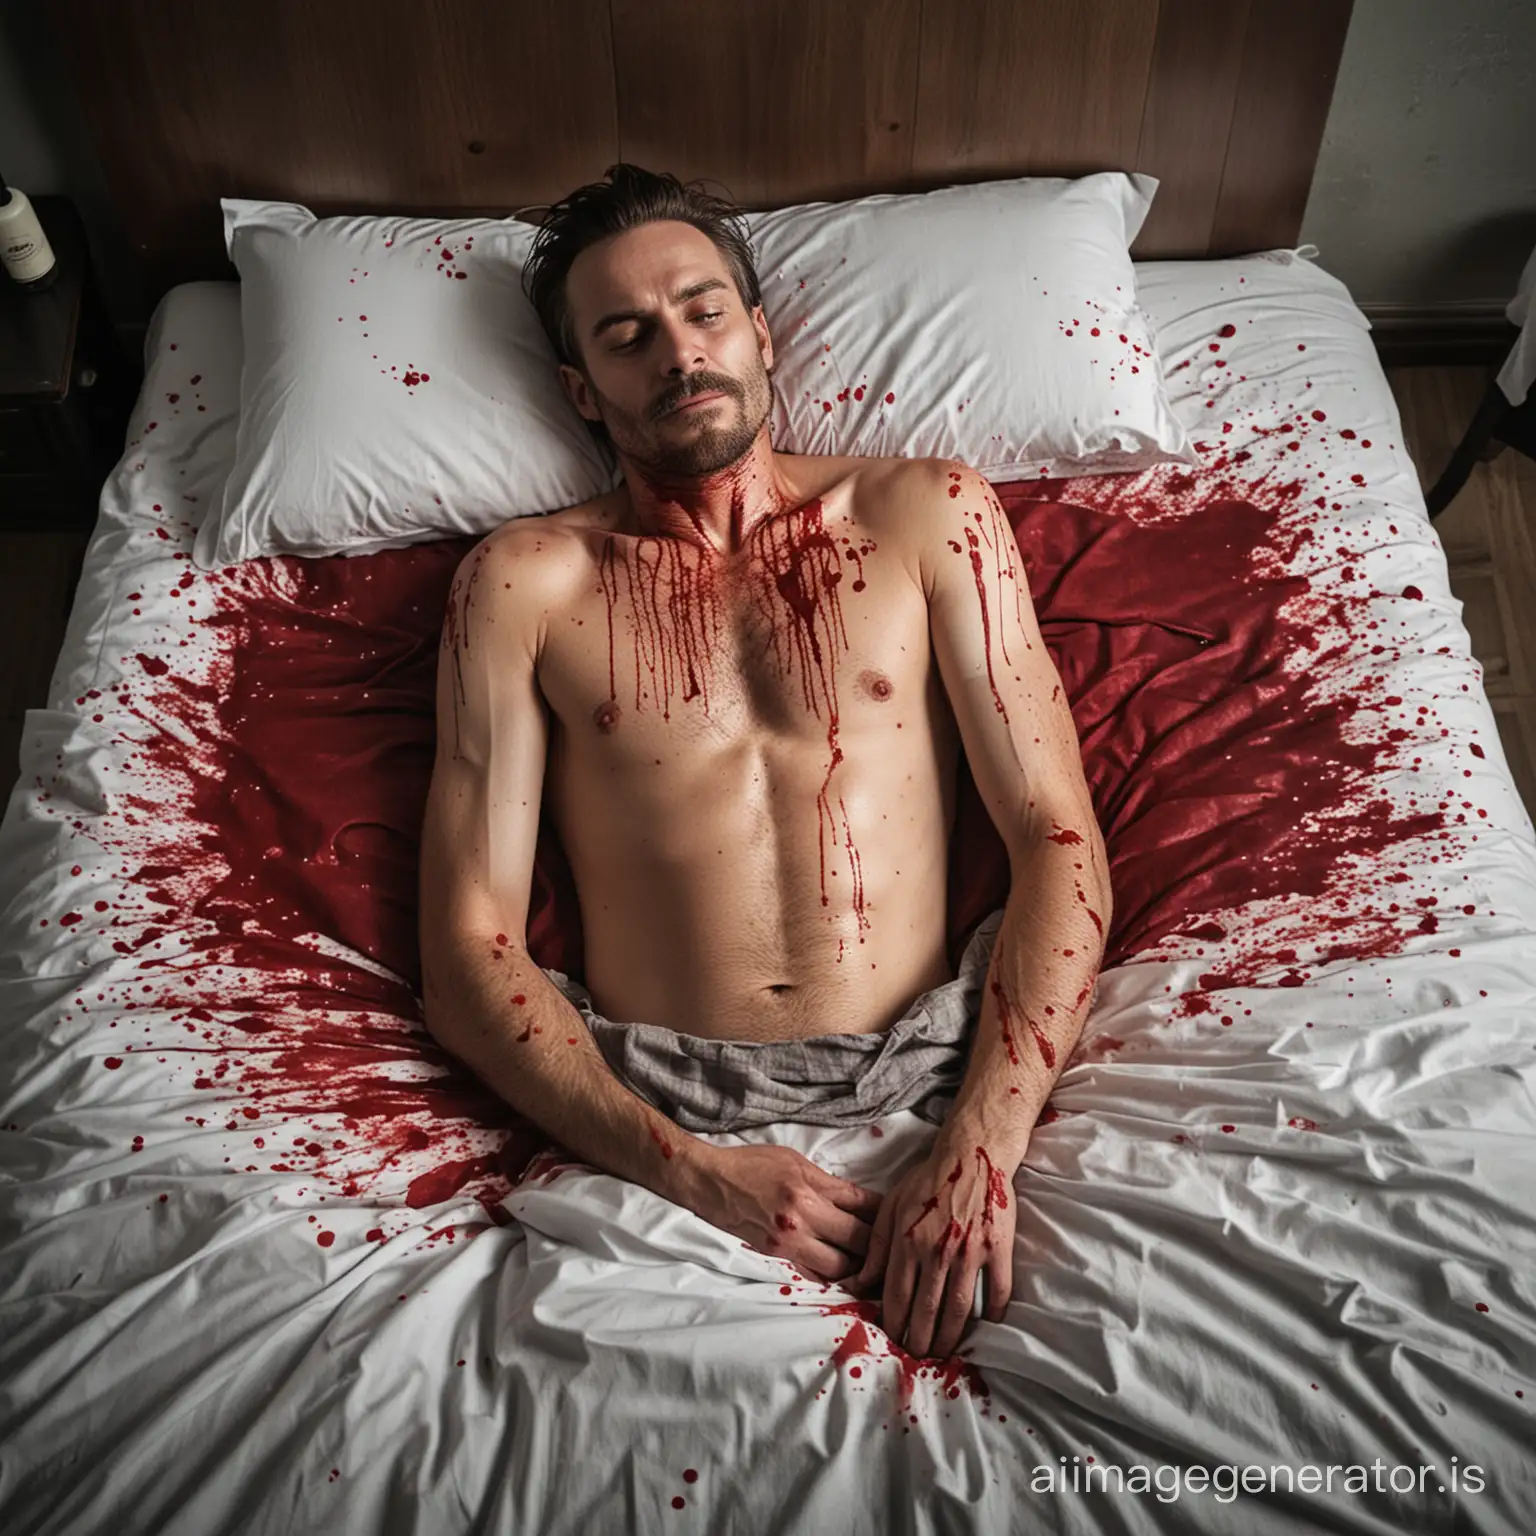 Crime-Scene-Deceased-Man-Found-in-Bed-with-Blood